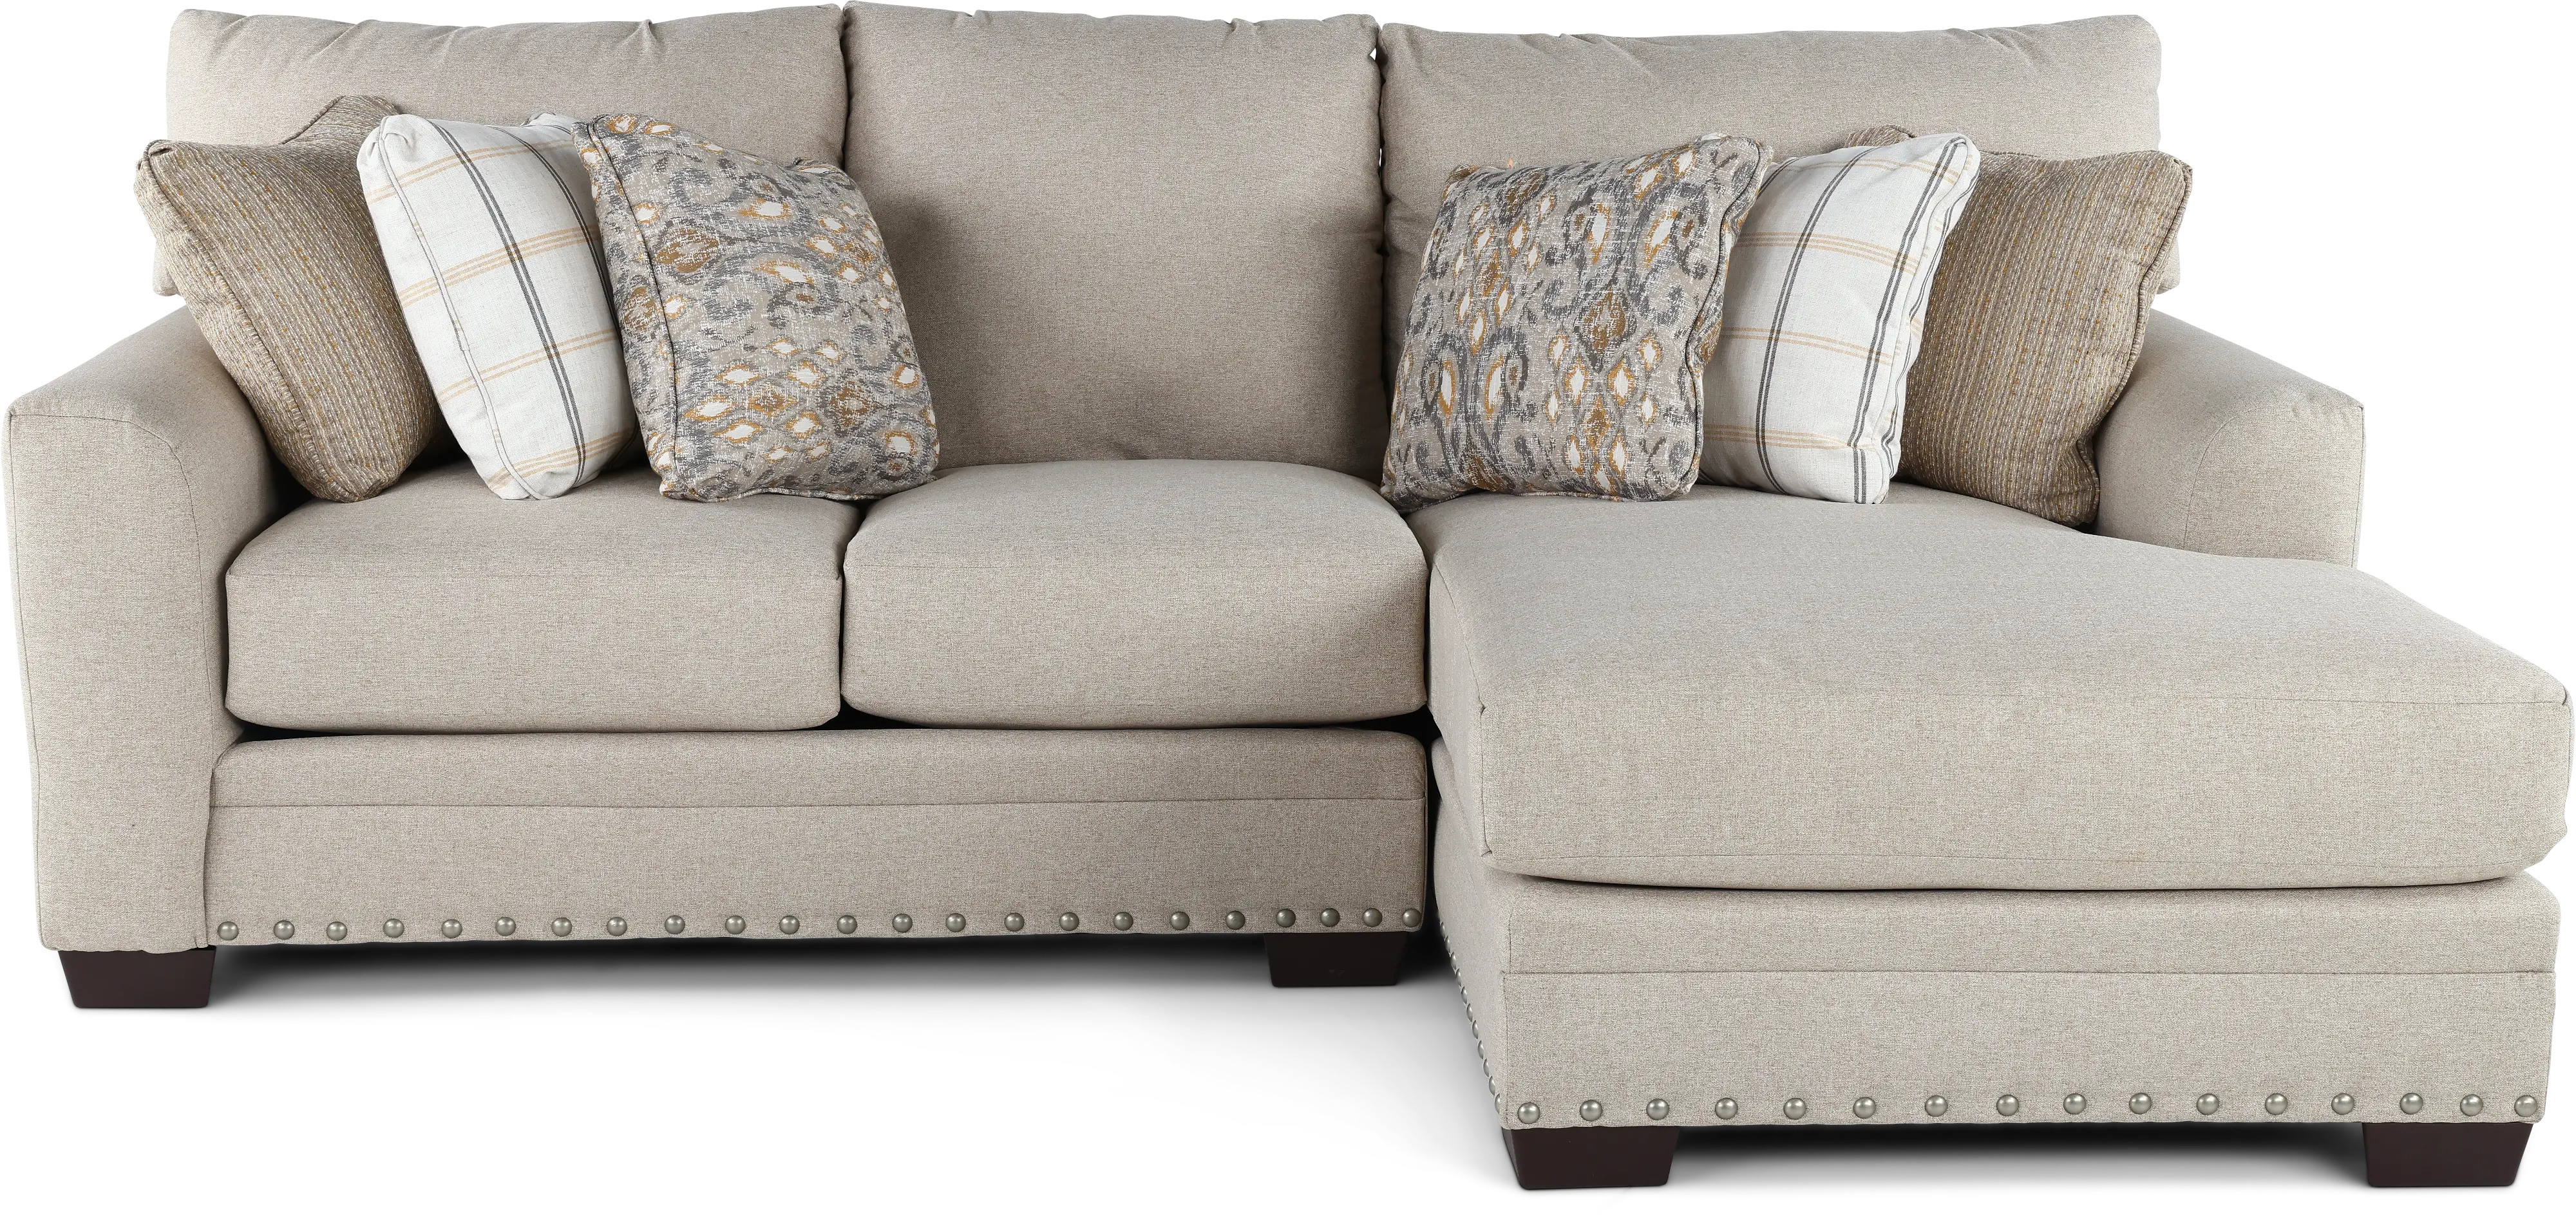 Middleton Beige 2 Piece Chaise Sectional